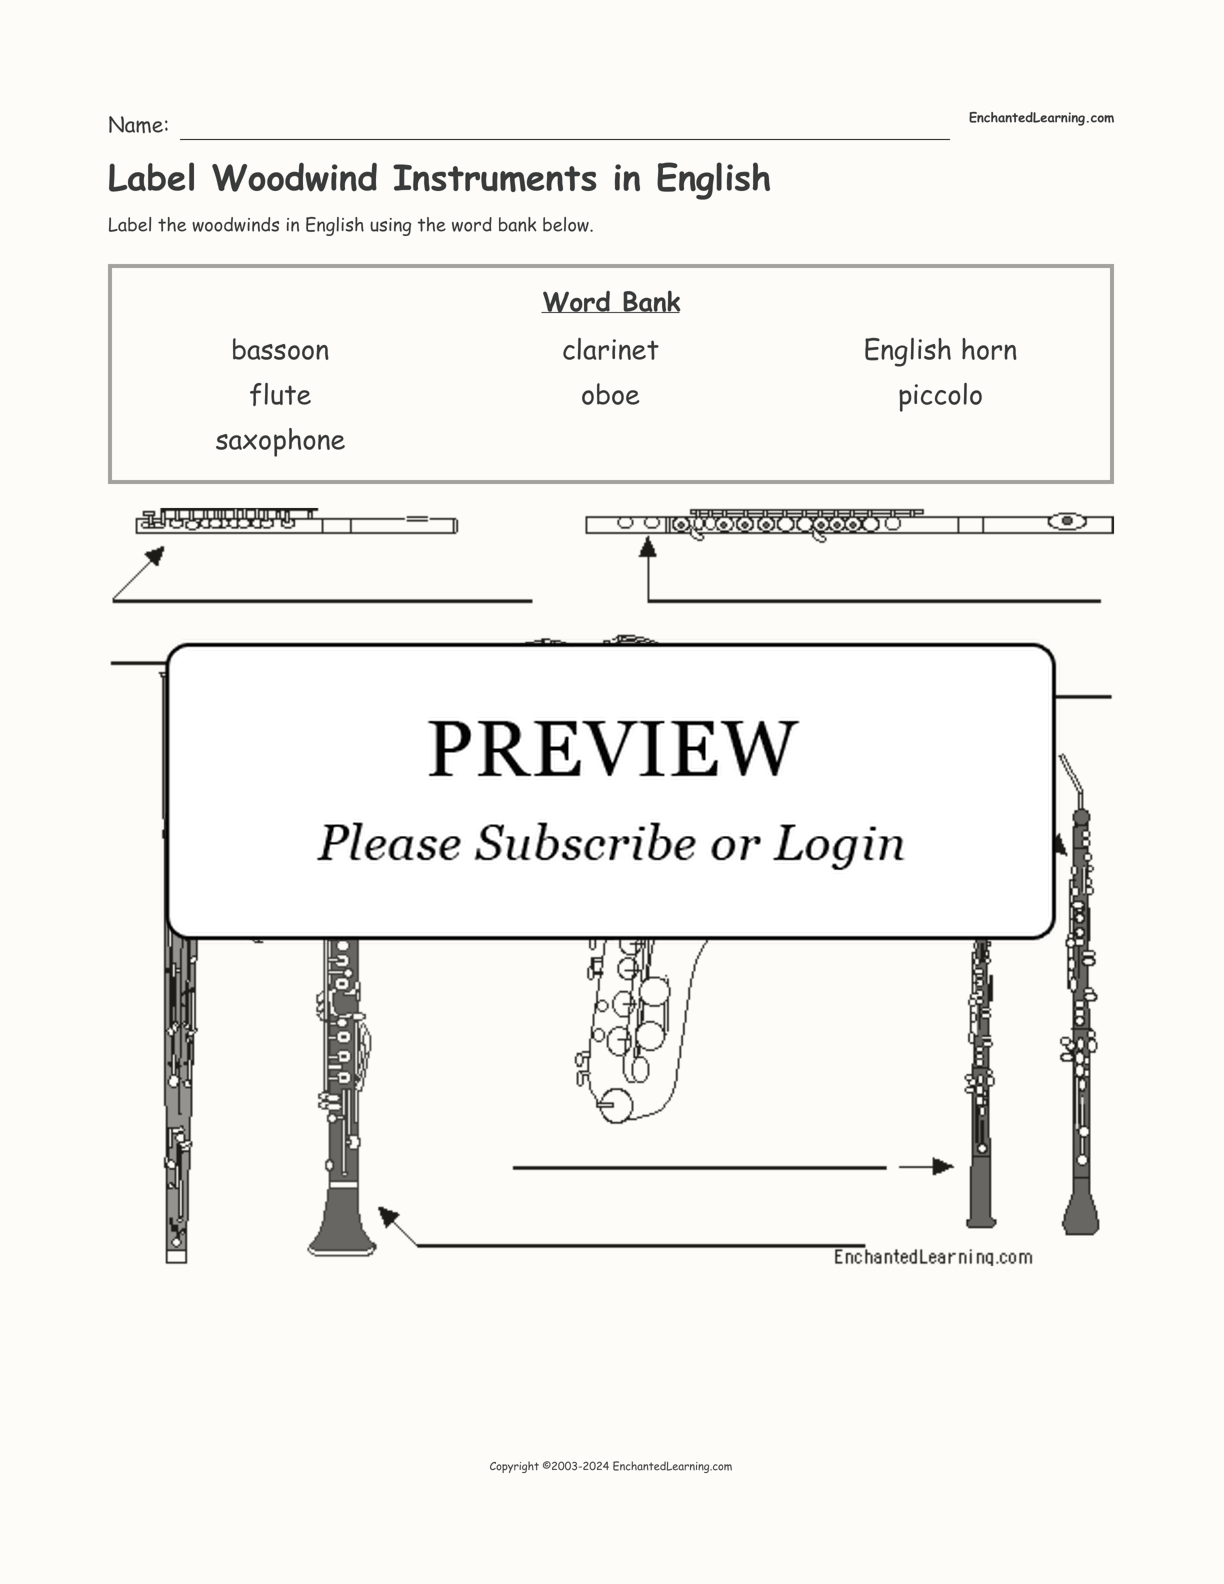 Label Woodwind Instruments in English interactive worksheet page 1